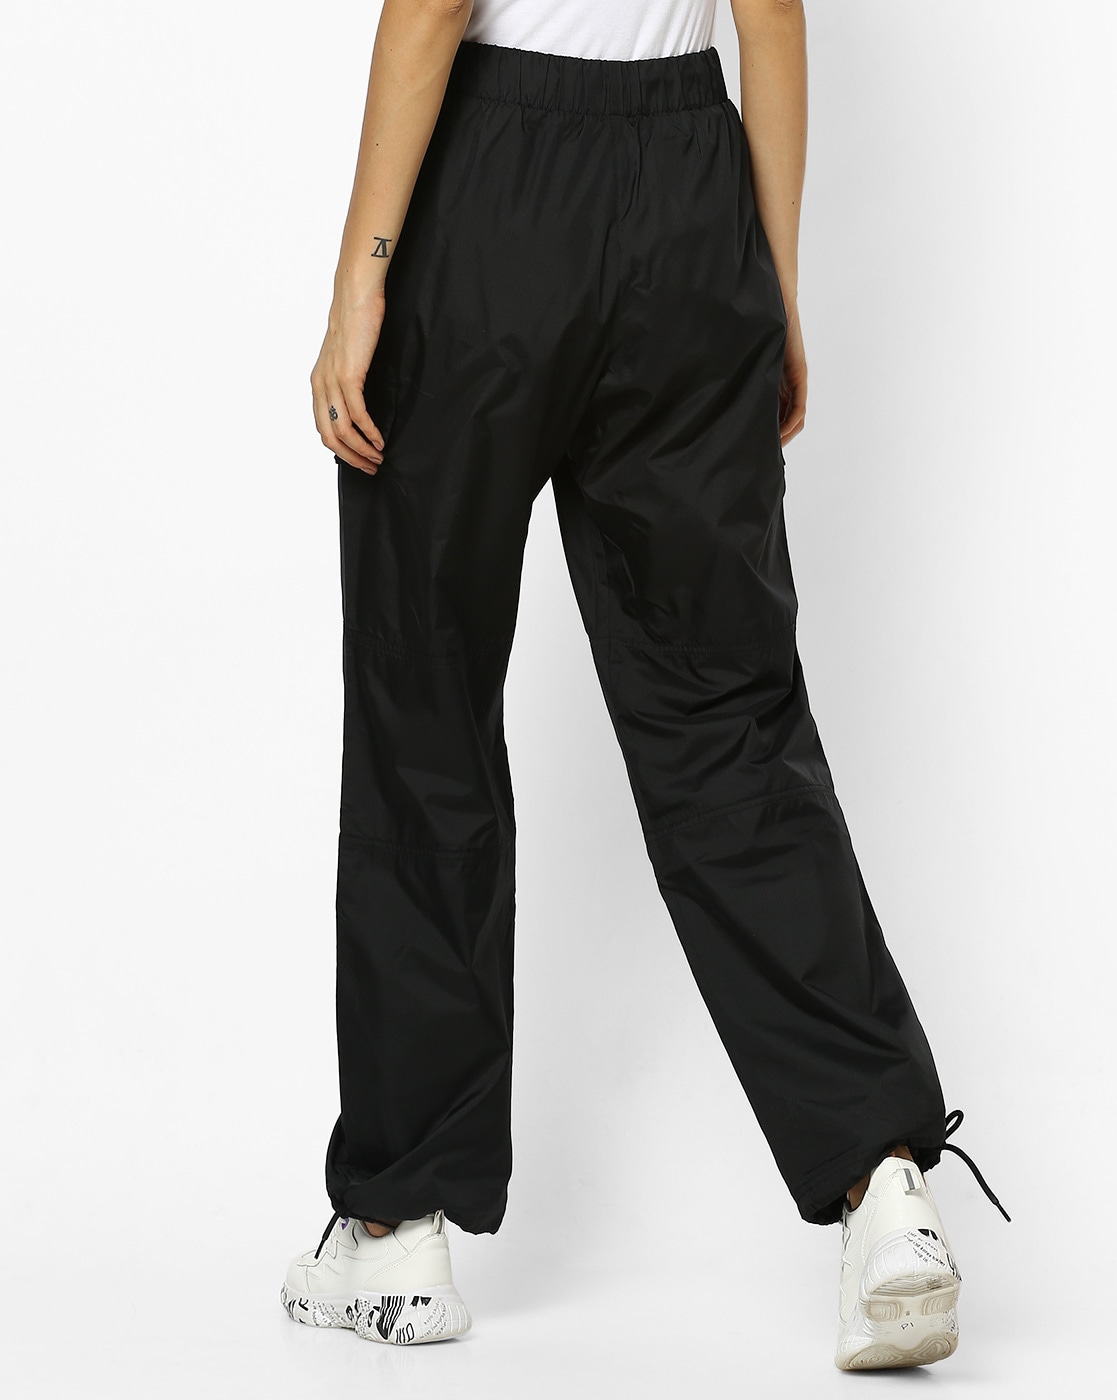 CL V Trail Track Pants with Insert Pockets